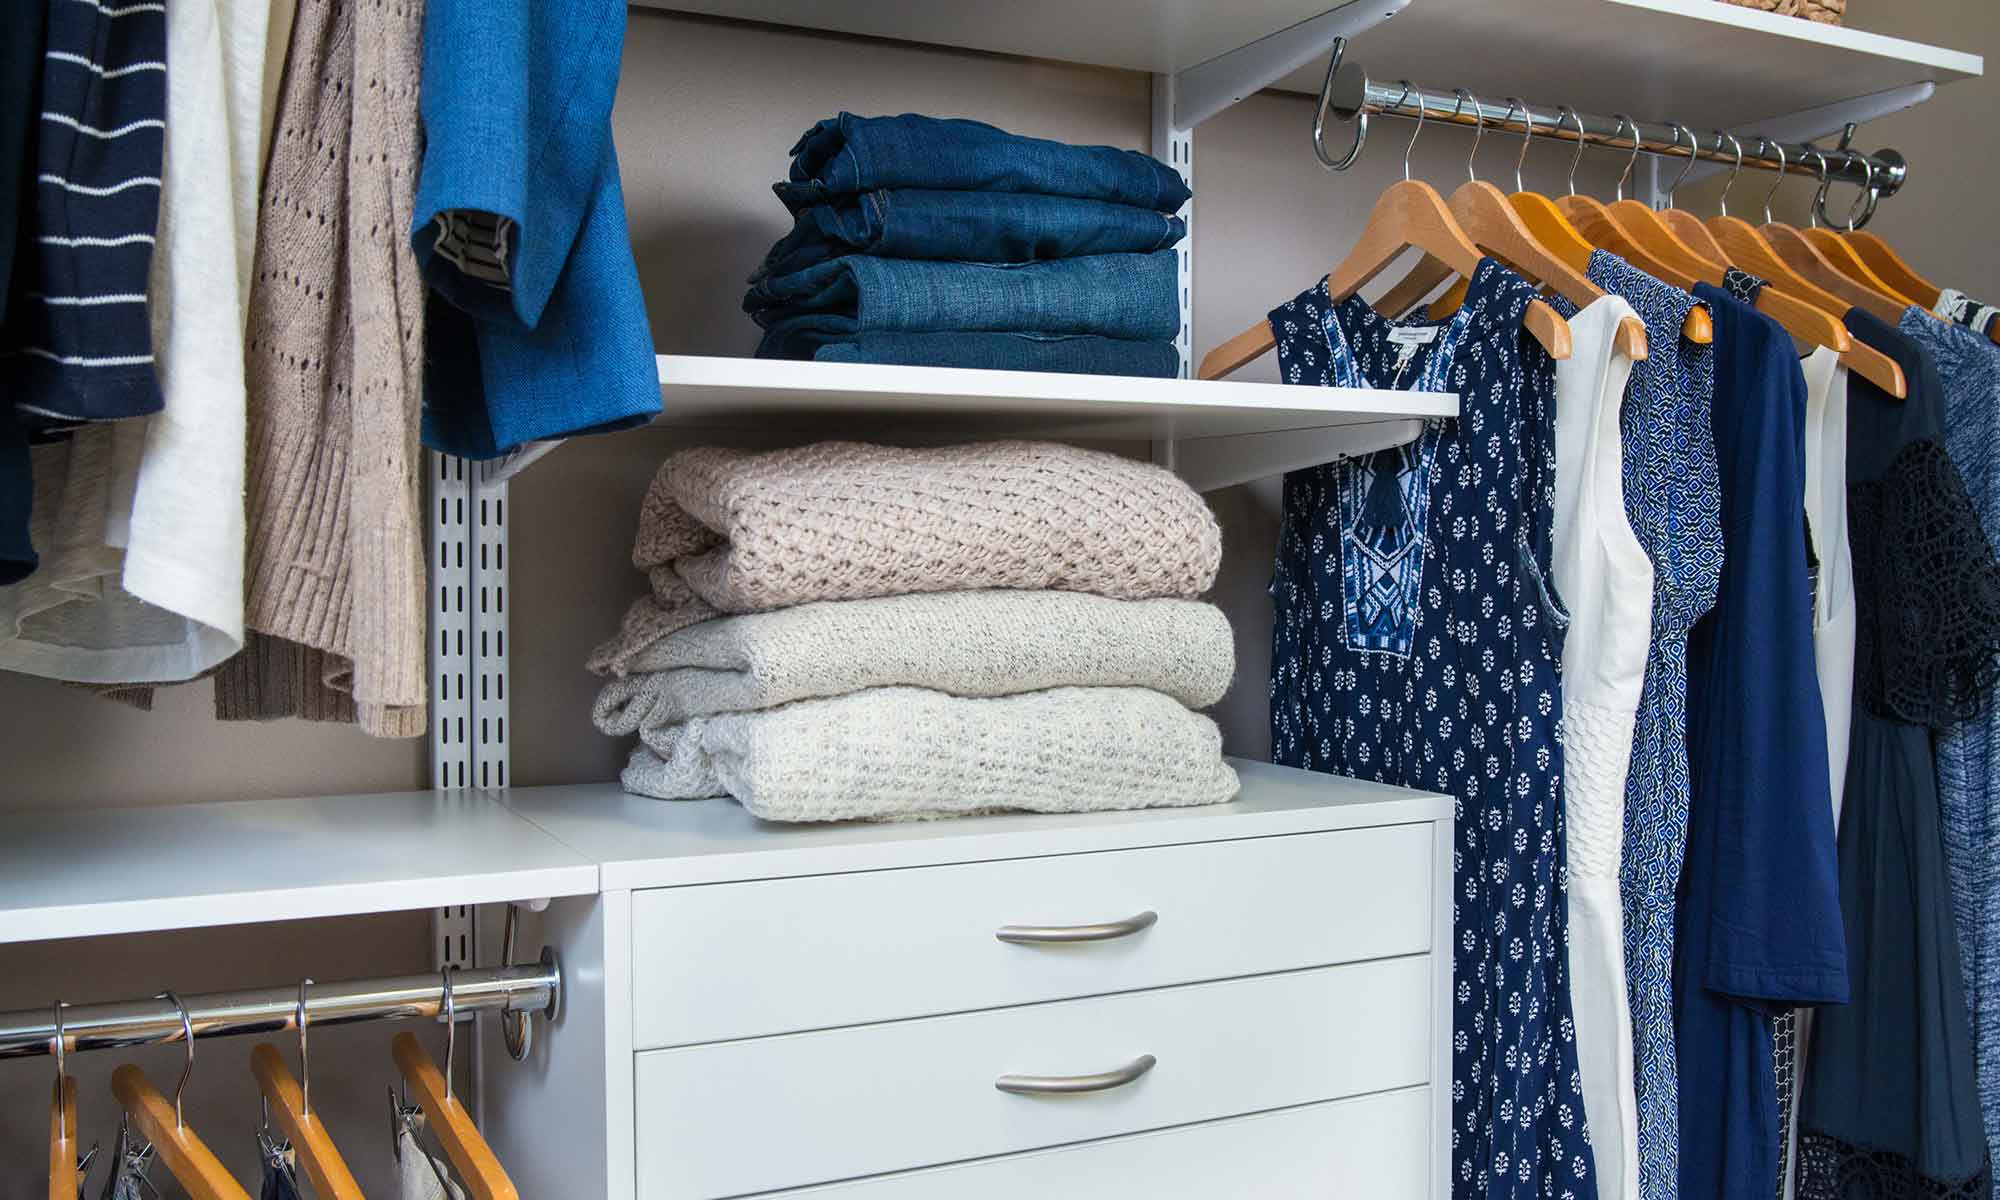 Learn about Organized Living freedomRail Closet Kits